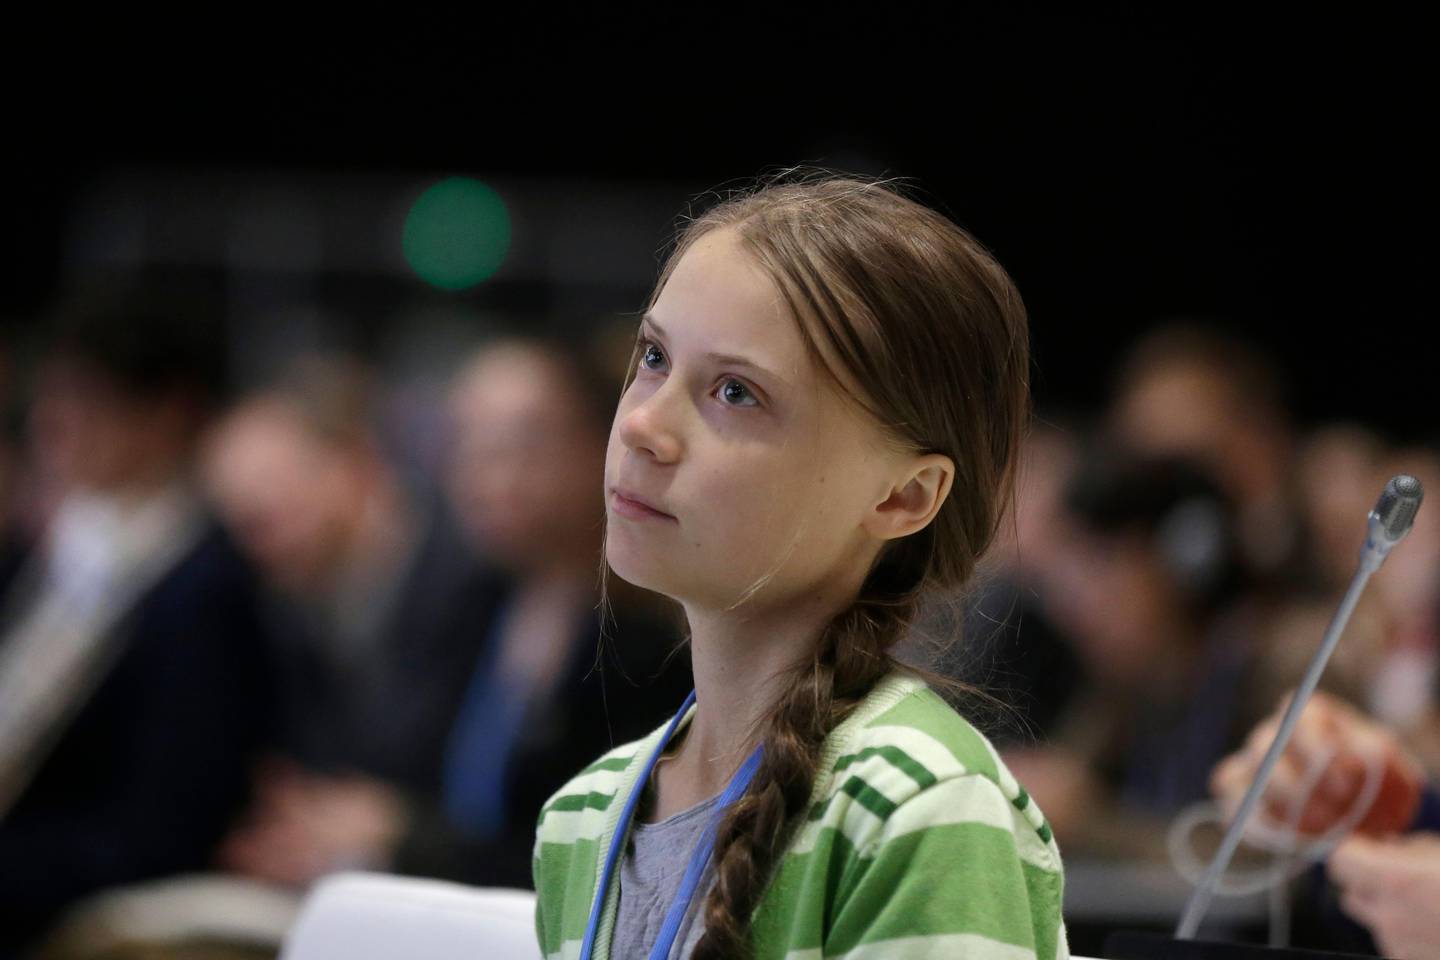 FILE - In this Wednesday, Dec. 11, 2019, file photo, Swedish climate activist Greta Thunberg listens to speeches before addressing the U.N. climate conference n Madrid, Spain. On Friday, Dec. 13, 2019, The Associated Press reported on a video circulating online and inaccurately described, in some social media posts, as showing Thunberg firing an AR-15 rifle. The shooter in the video is another young Swede named Emmy Slinge. (AP Photo/Paul White)